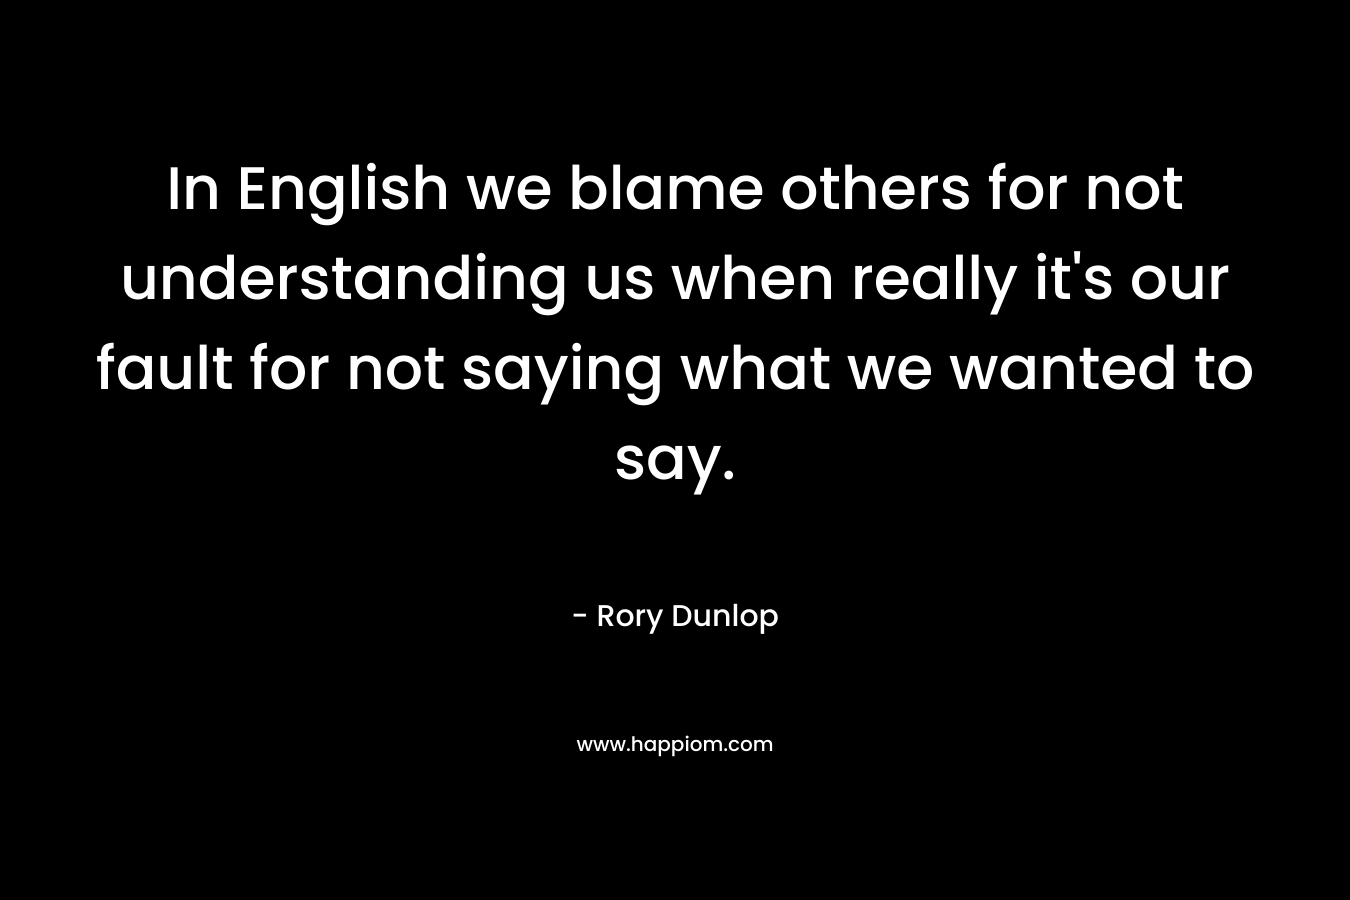 In English we blame others for not understanding us when really it's our fault for not saying what we wanted to say.